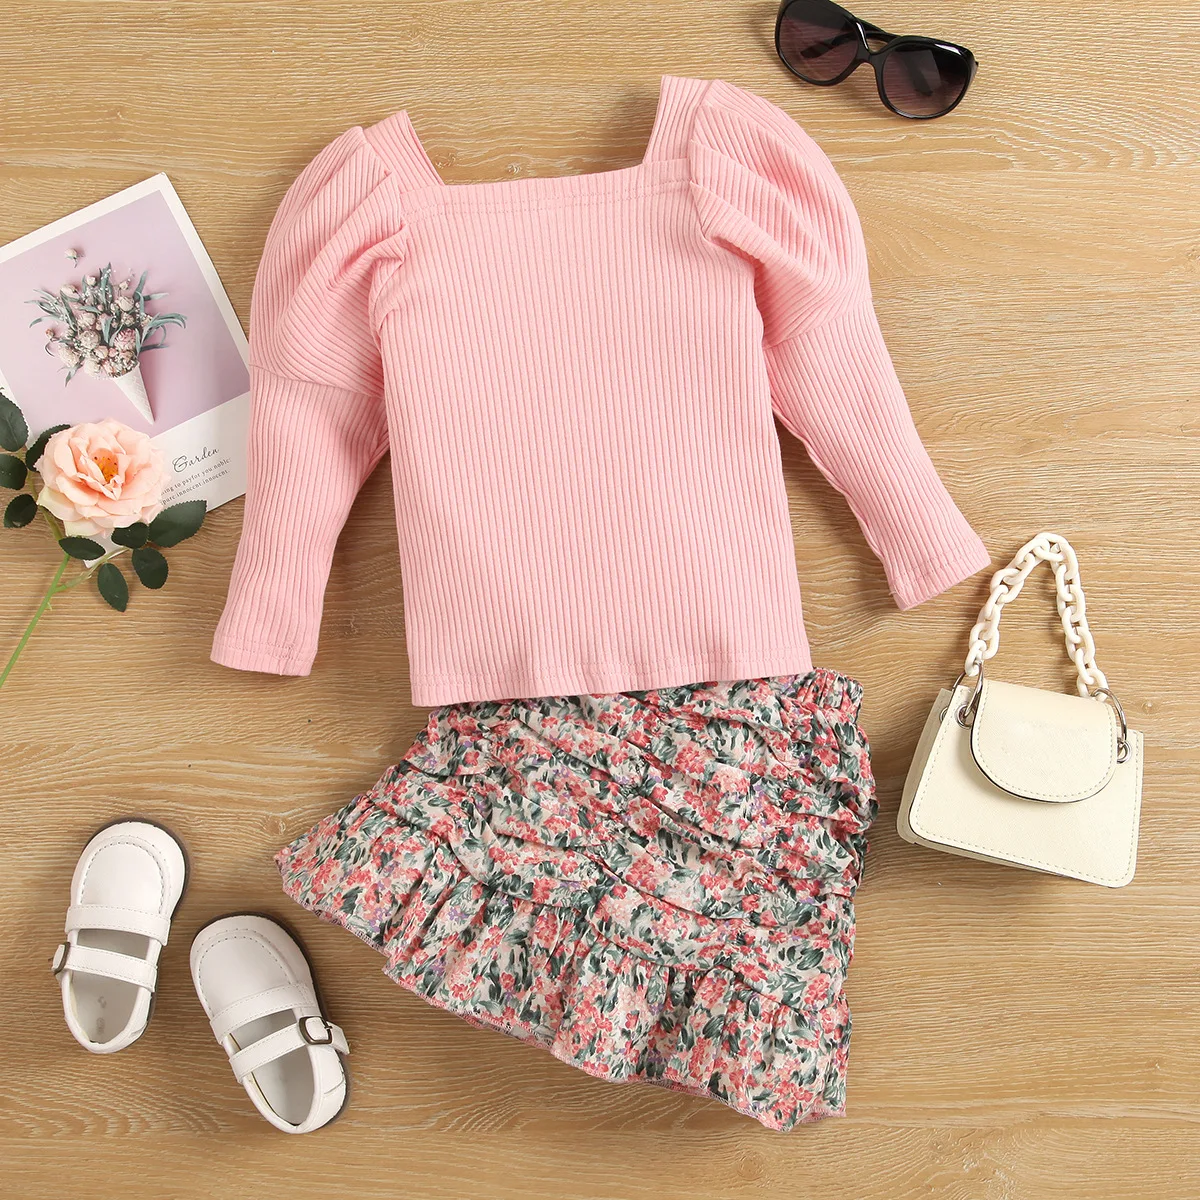 

boutique for kids 2Pcs Girl Clothes Sets Long Sleeve pink ribbed tops floral skirt casual Clothing Outfit set, As image shown